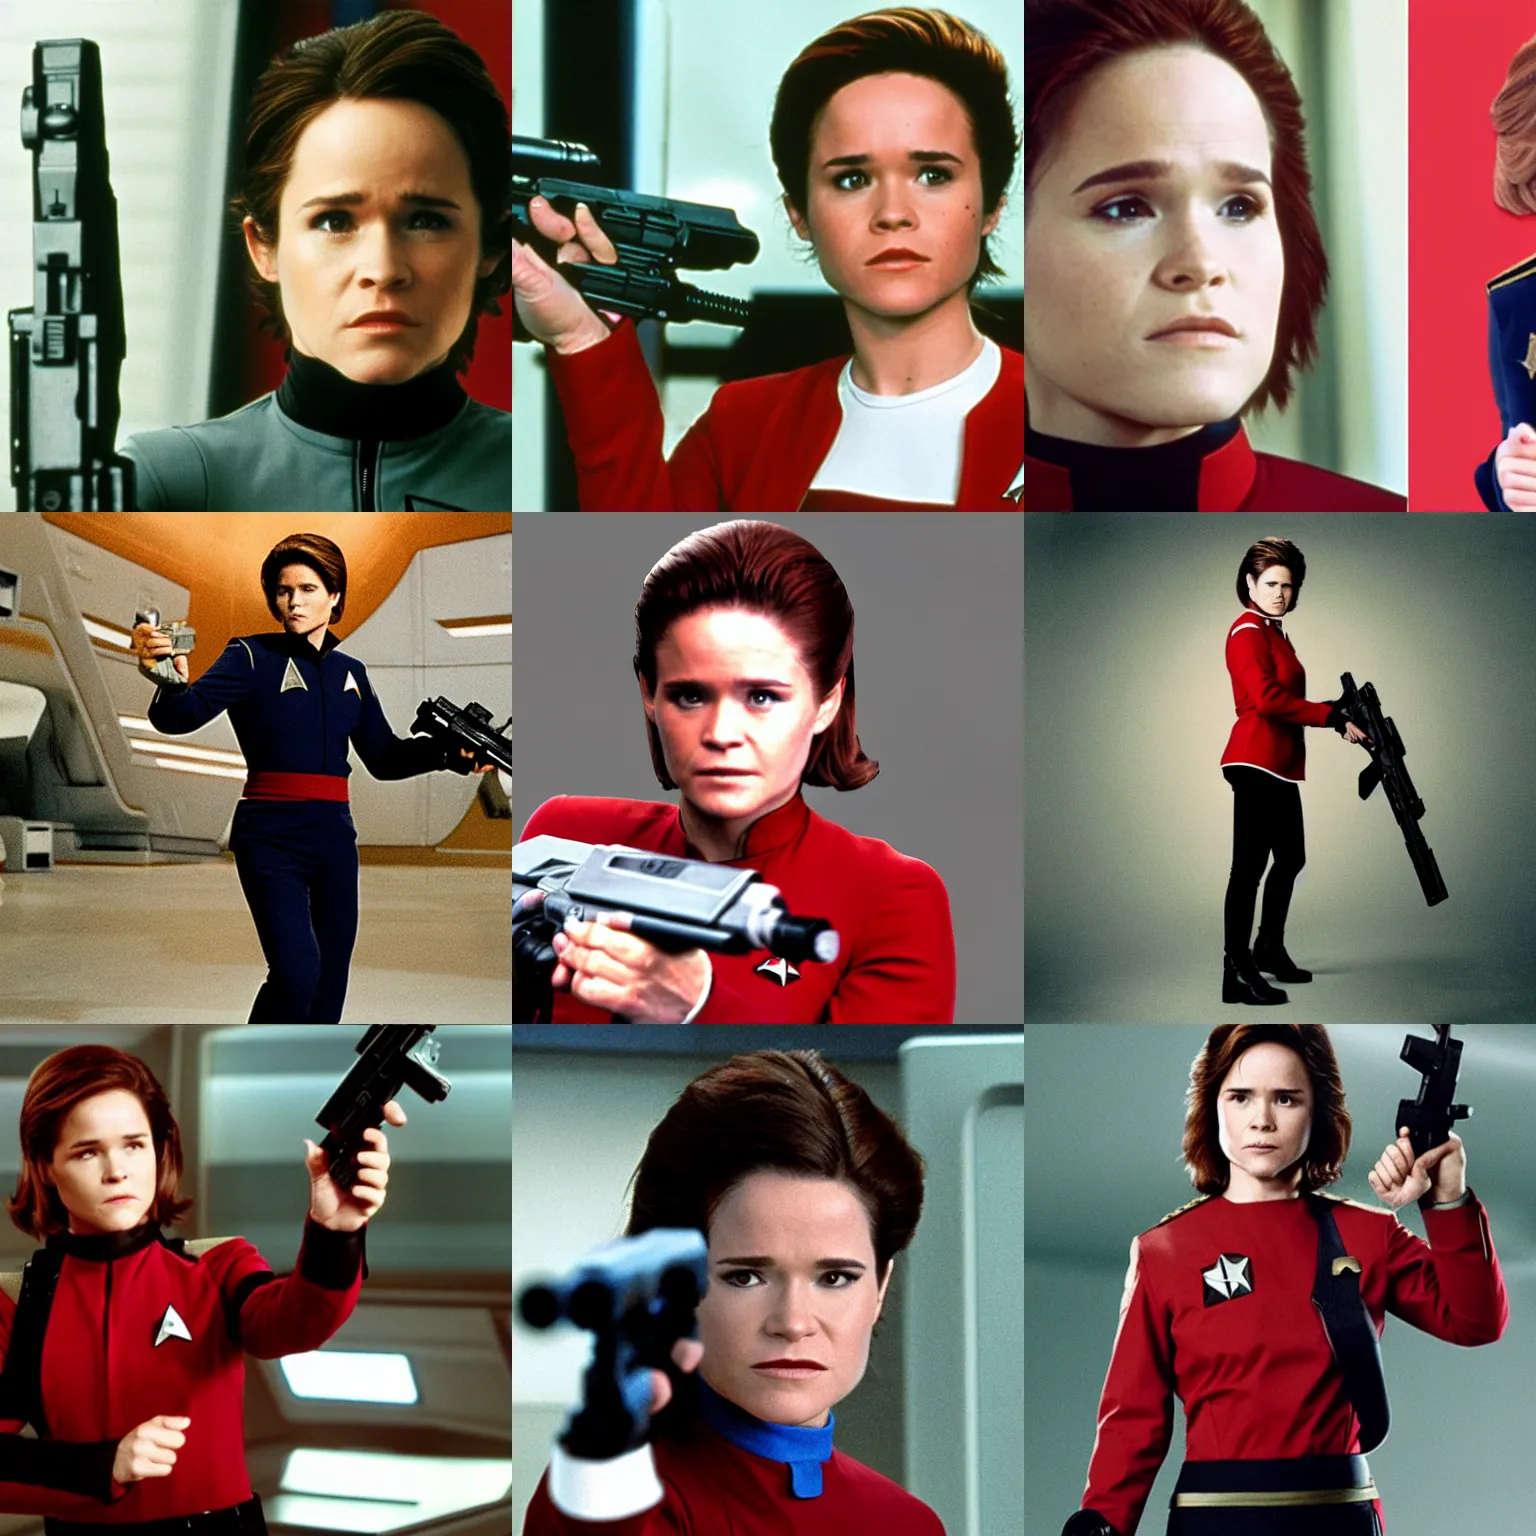 Prompt: Ellen Page as Captain Janeway from Star Trek Voyager, wearing a red captain's uniform, holding a phaser rifle